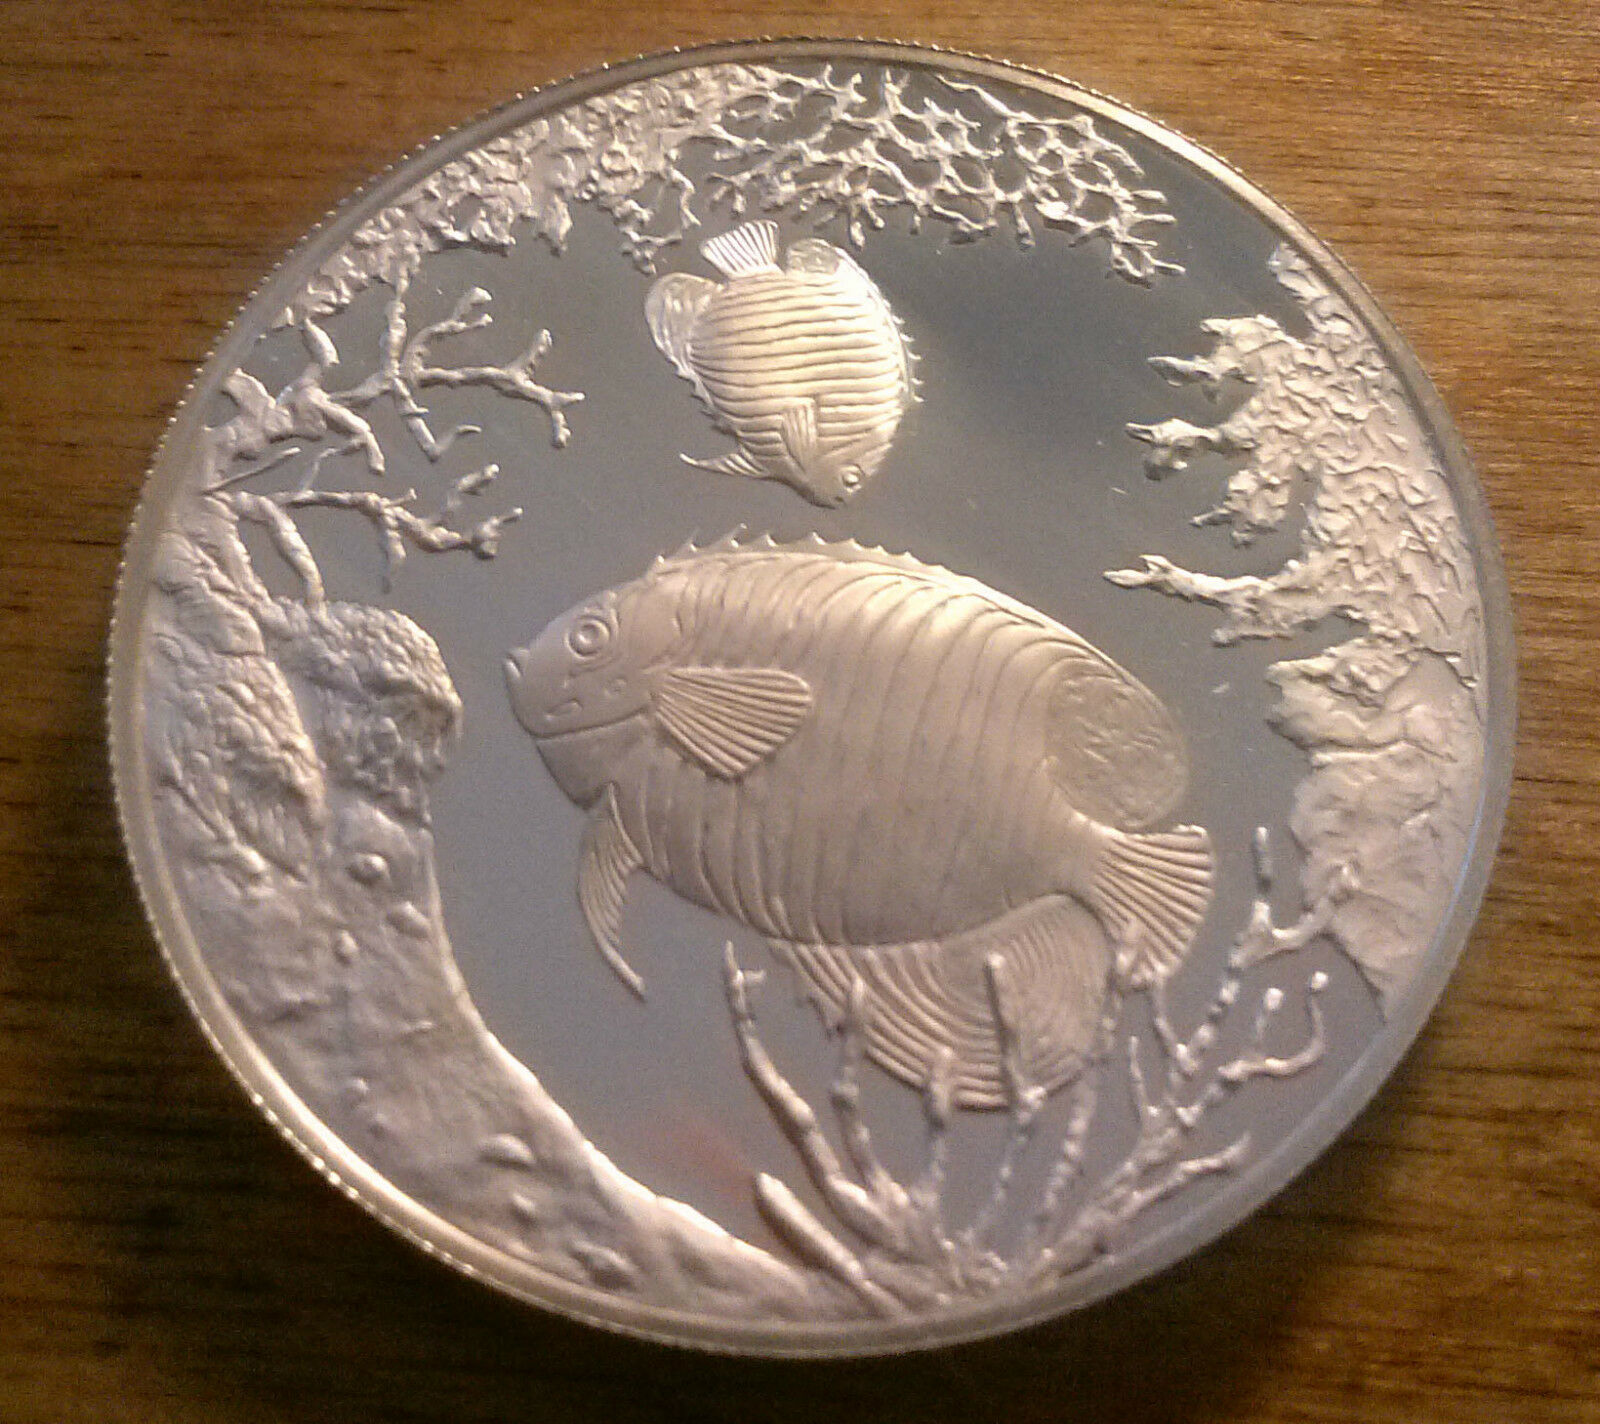 STUNNING QUEEN ANGEL FISH 20 CROWN SILVER PROOF COIN DATED 1999 TURKS & CAICOS